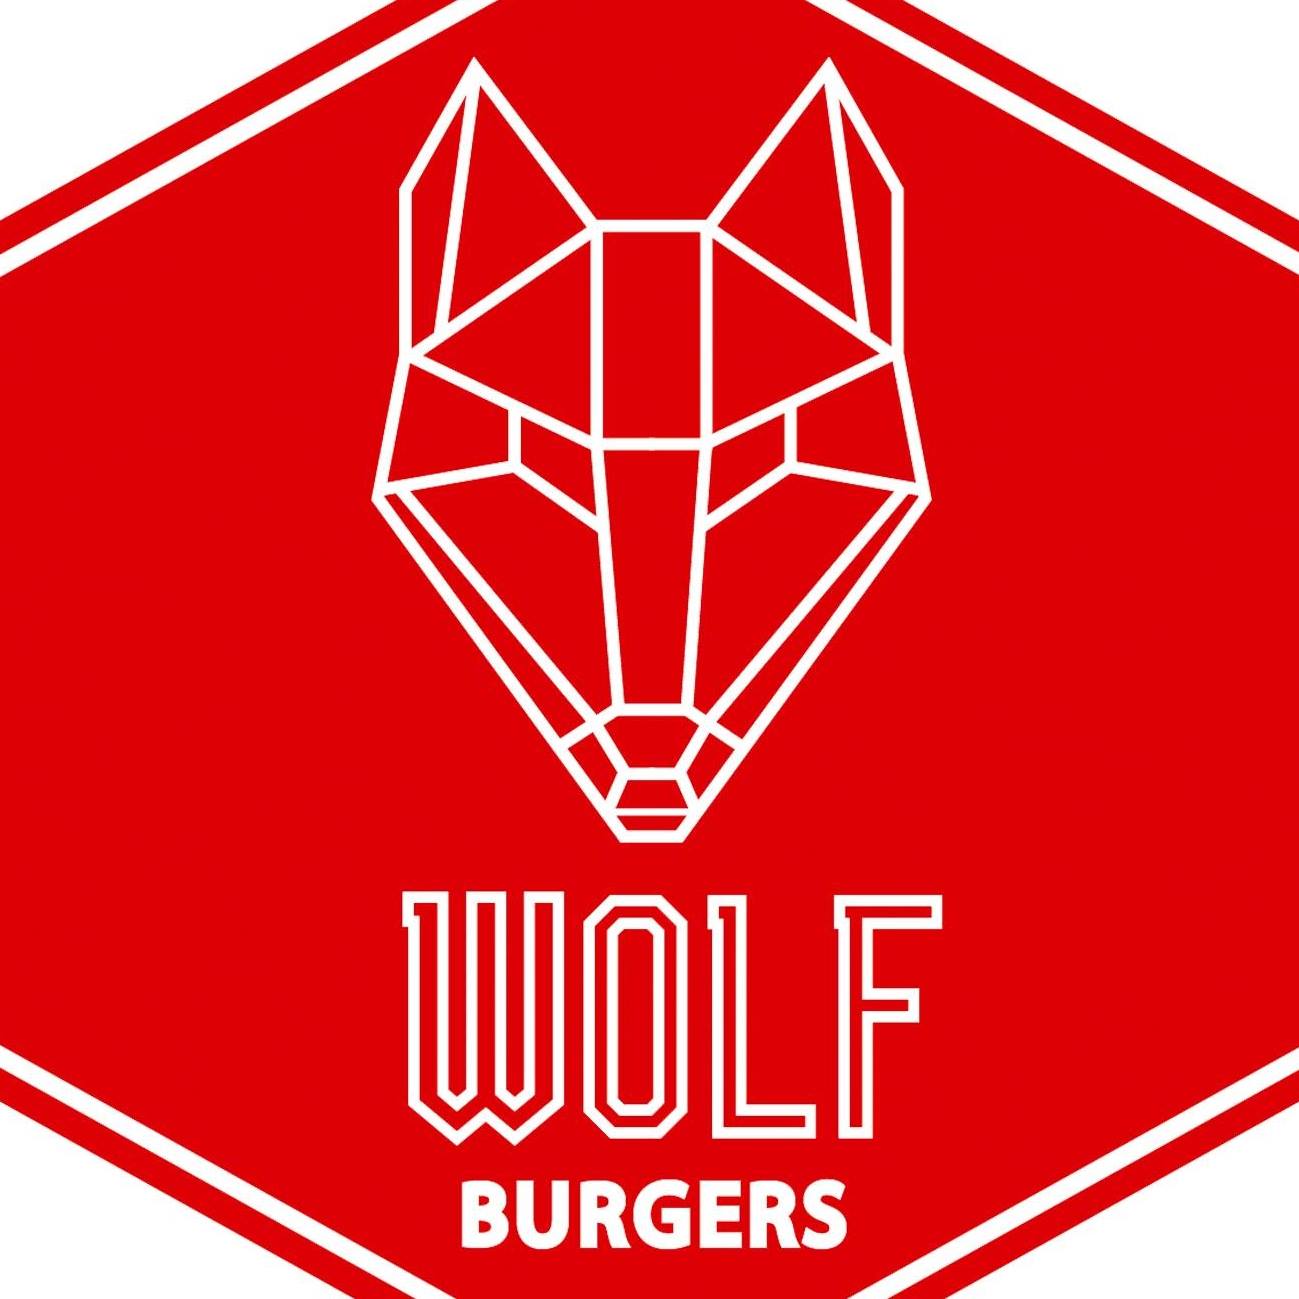 $4 Cash Voucher [Exclusive Deal] at Wolf Burgers - Get Deals, Cashback and Rewards with ShopBack GO